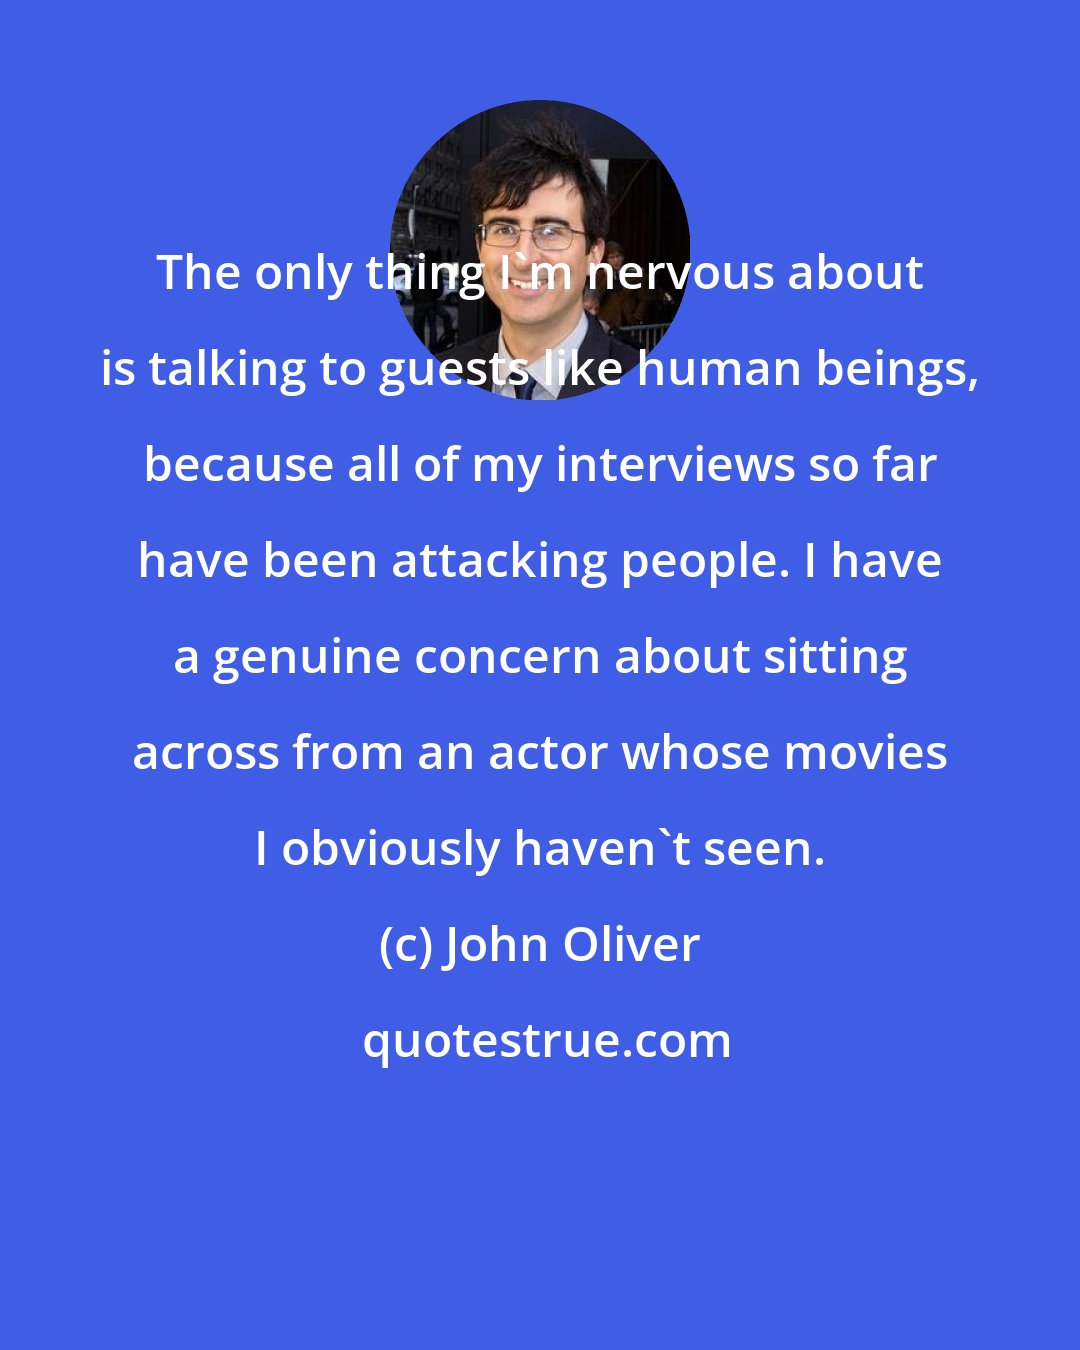 John Oliver: The only thing I'm nervous about is talking to guests like human beings, because all of my interviews so far have been attacking people. I have a genuine concern about sitting across from an actor whose movies I obviously haven't seen.